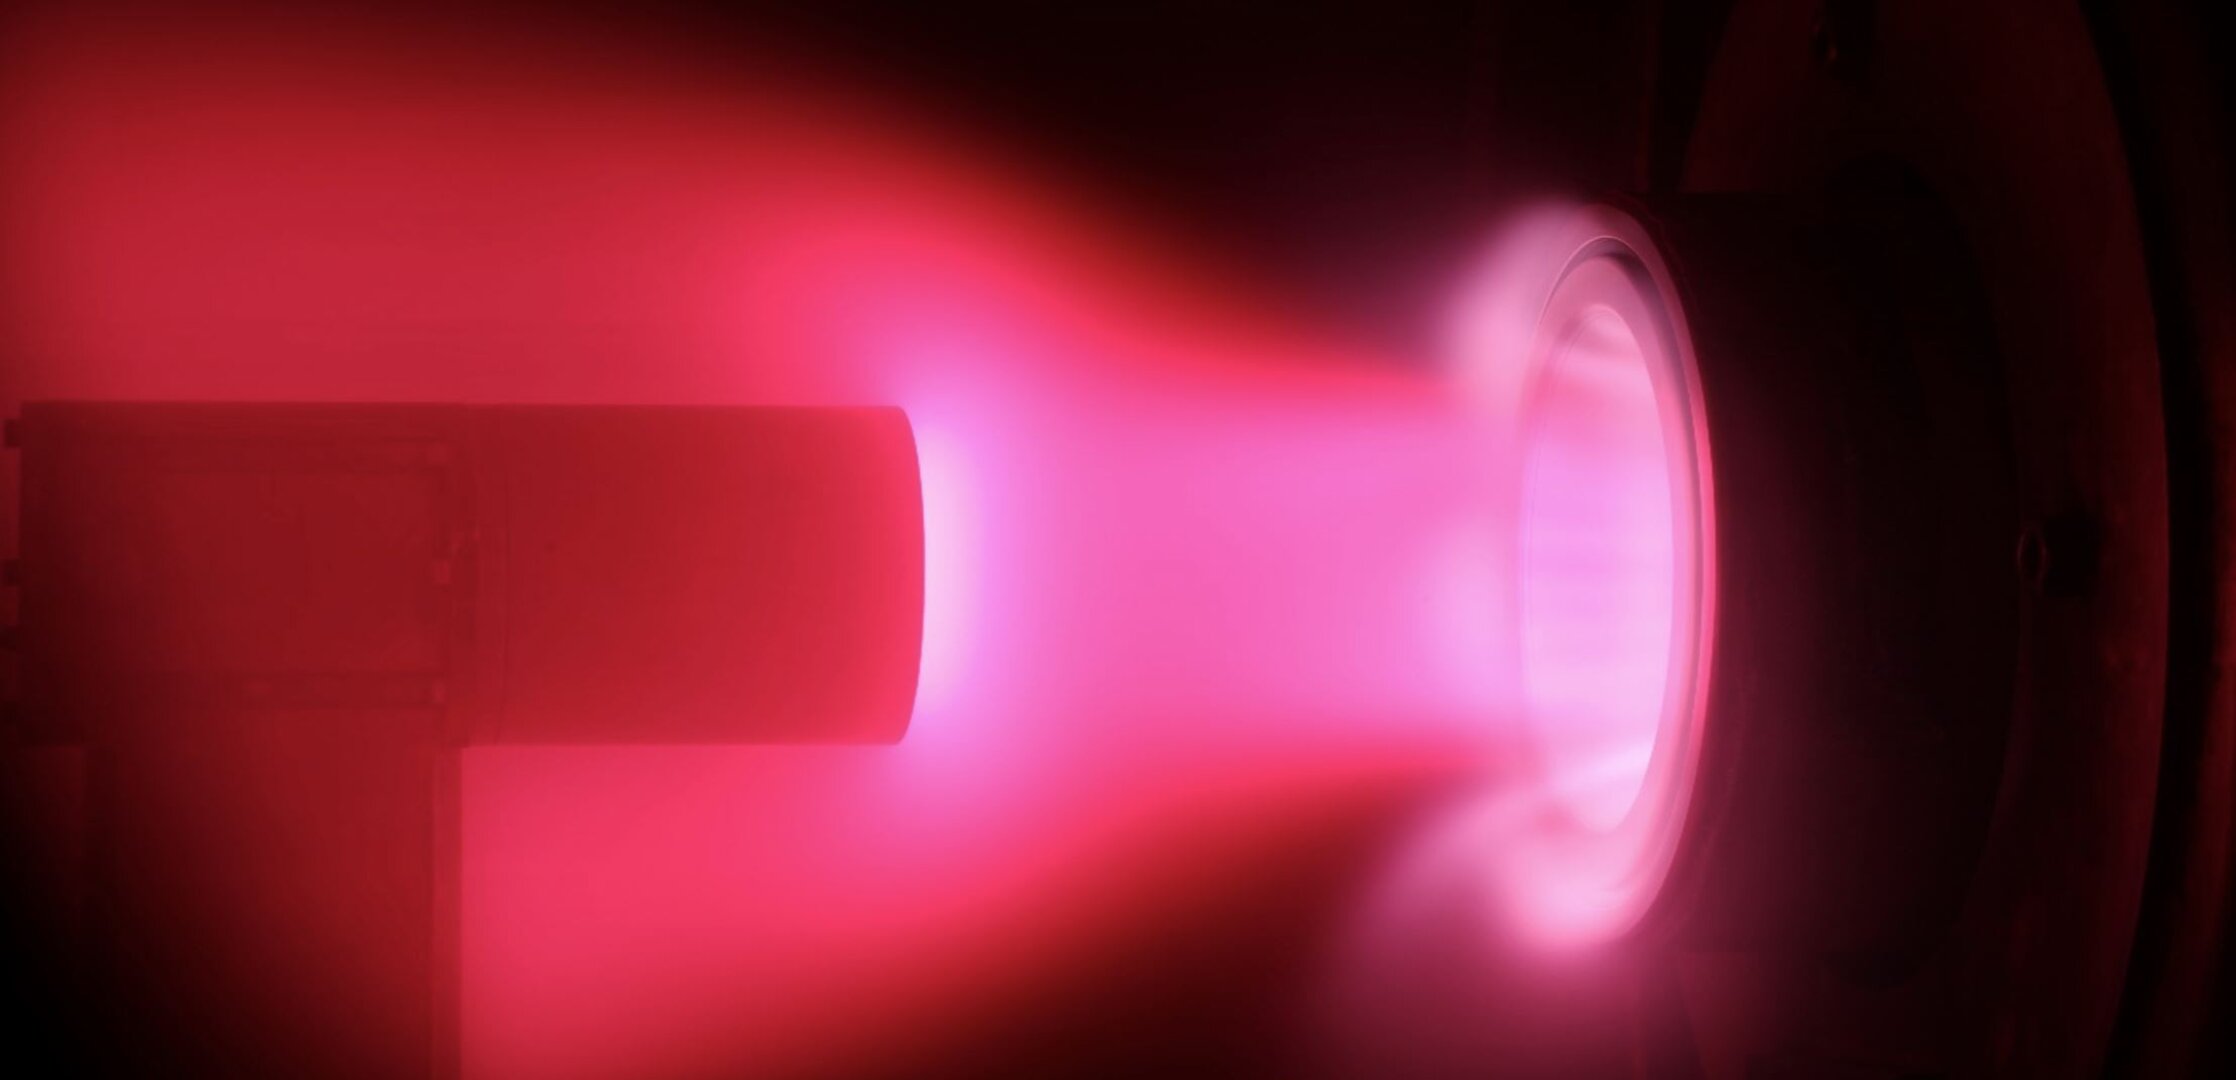 A pink glow seems to be coming out of a wind tunnel, encapsulating a piece of test equipment.